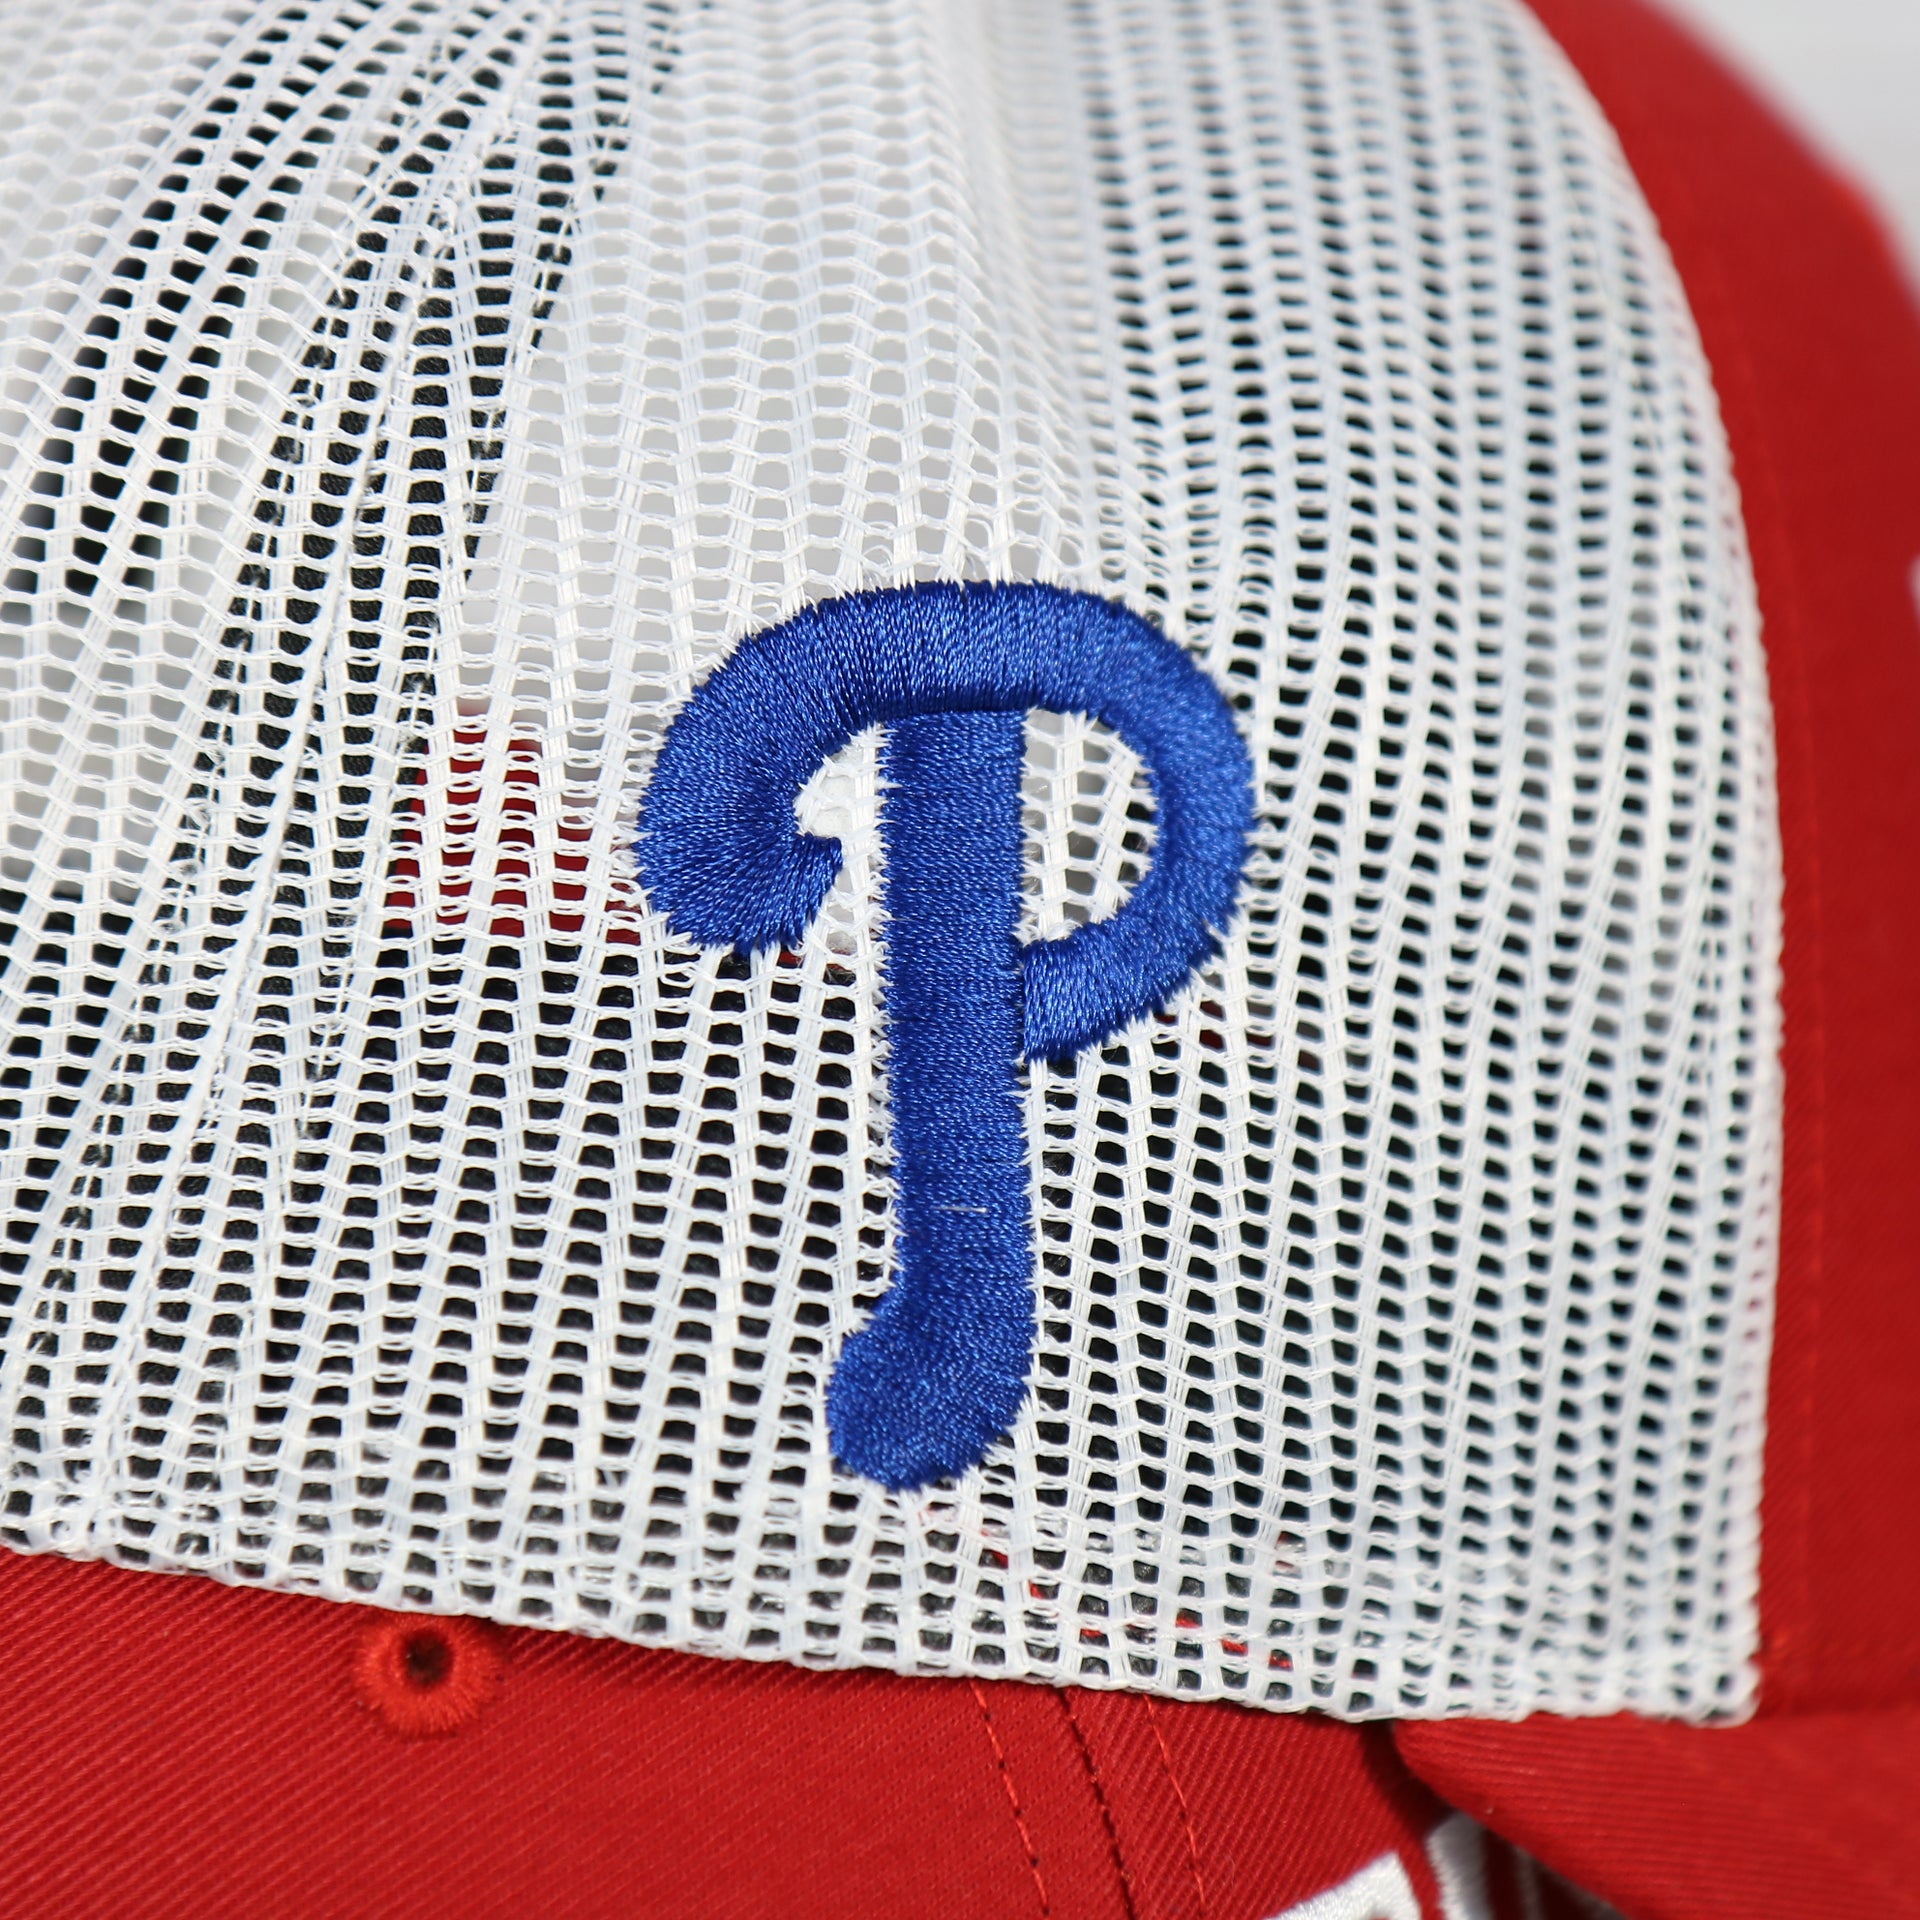 phillies logo on wearer's right on the Philadelphia Phillies 2022 World Series Fightin' Phils Phillies Logo Side Patch Red Adjustable Trucker Snapback Hat